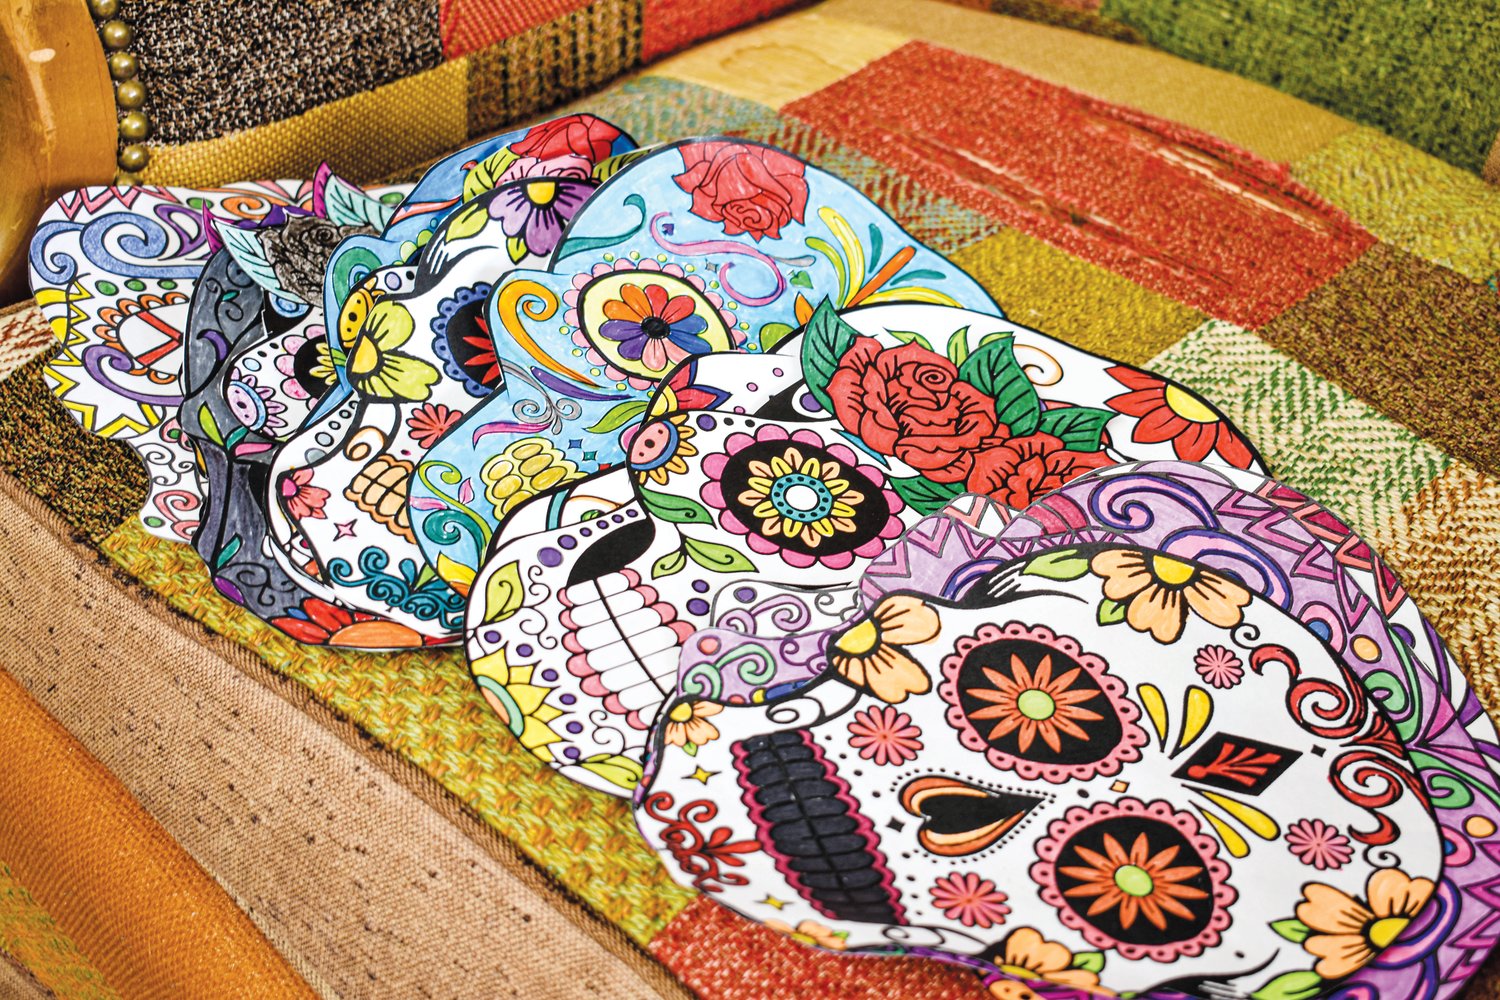 CIS youth, staff and parents colored in these skulls, or 'calaveras' in Spanish, which represent deceased relatives in traditional Day of the Dead iconography.